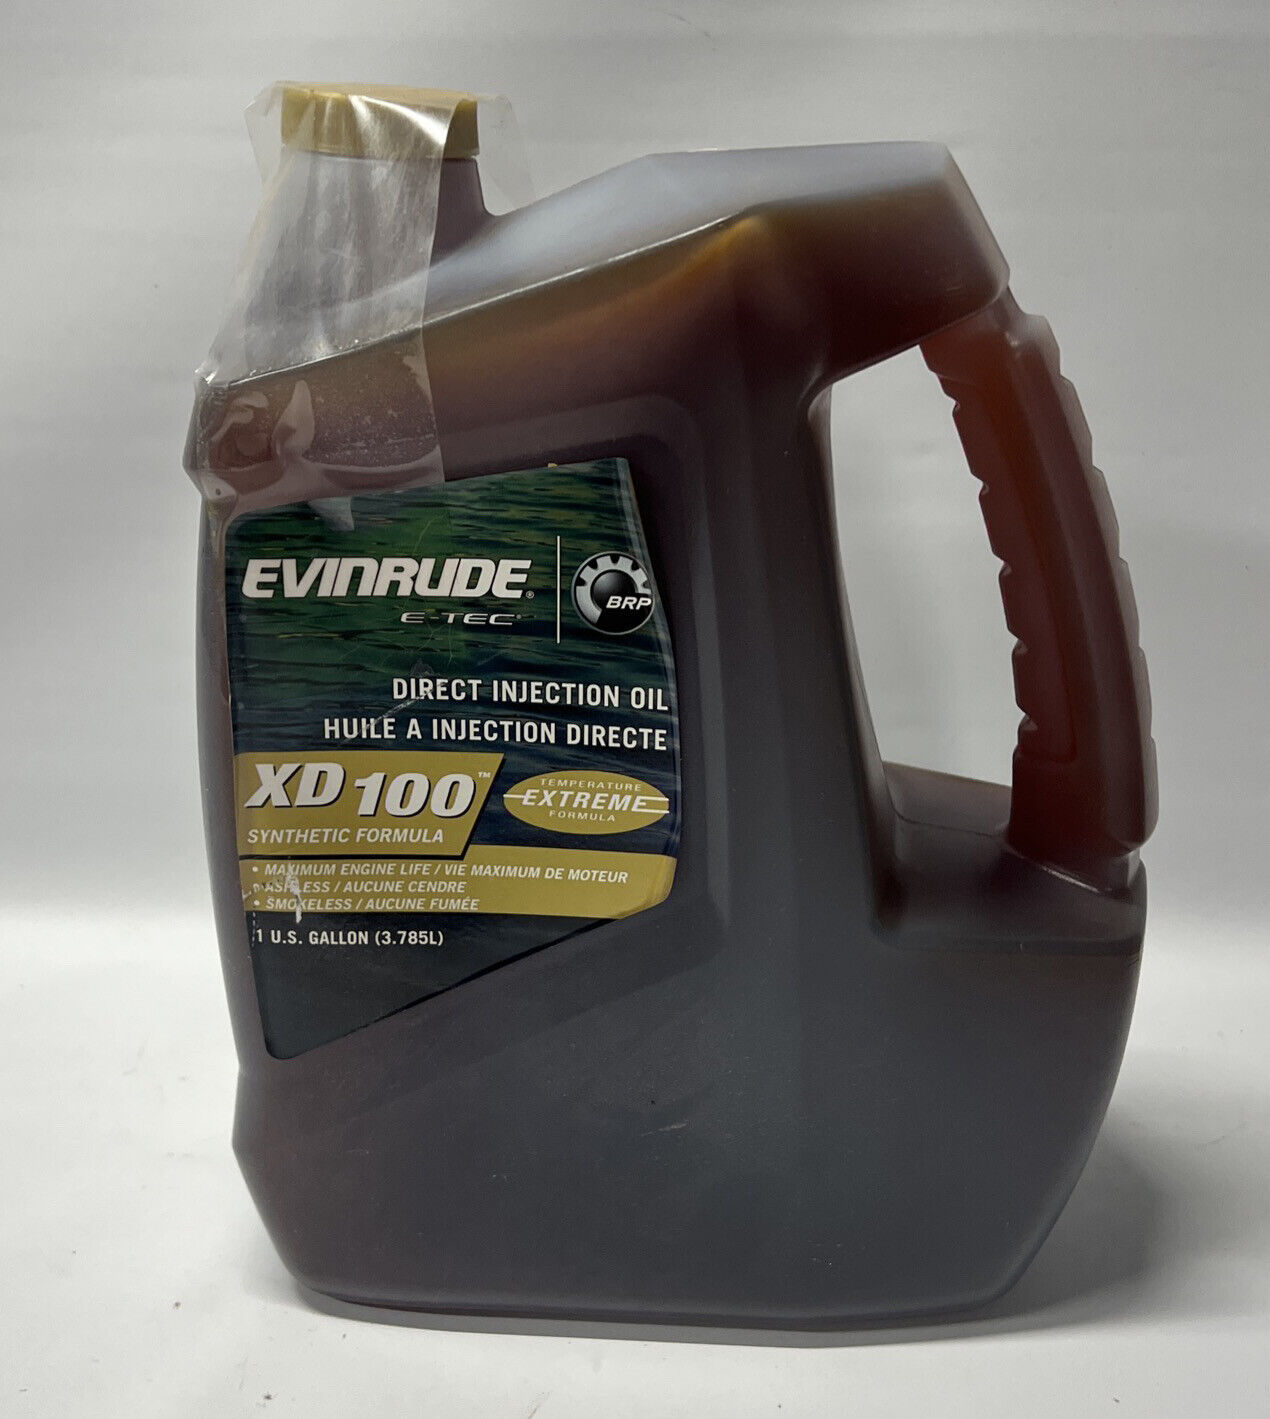 Evinrude Johnson Xd 100 Synthetic Marine Engine Oil 1 Gallon Direct Injection